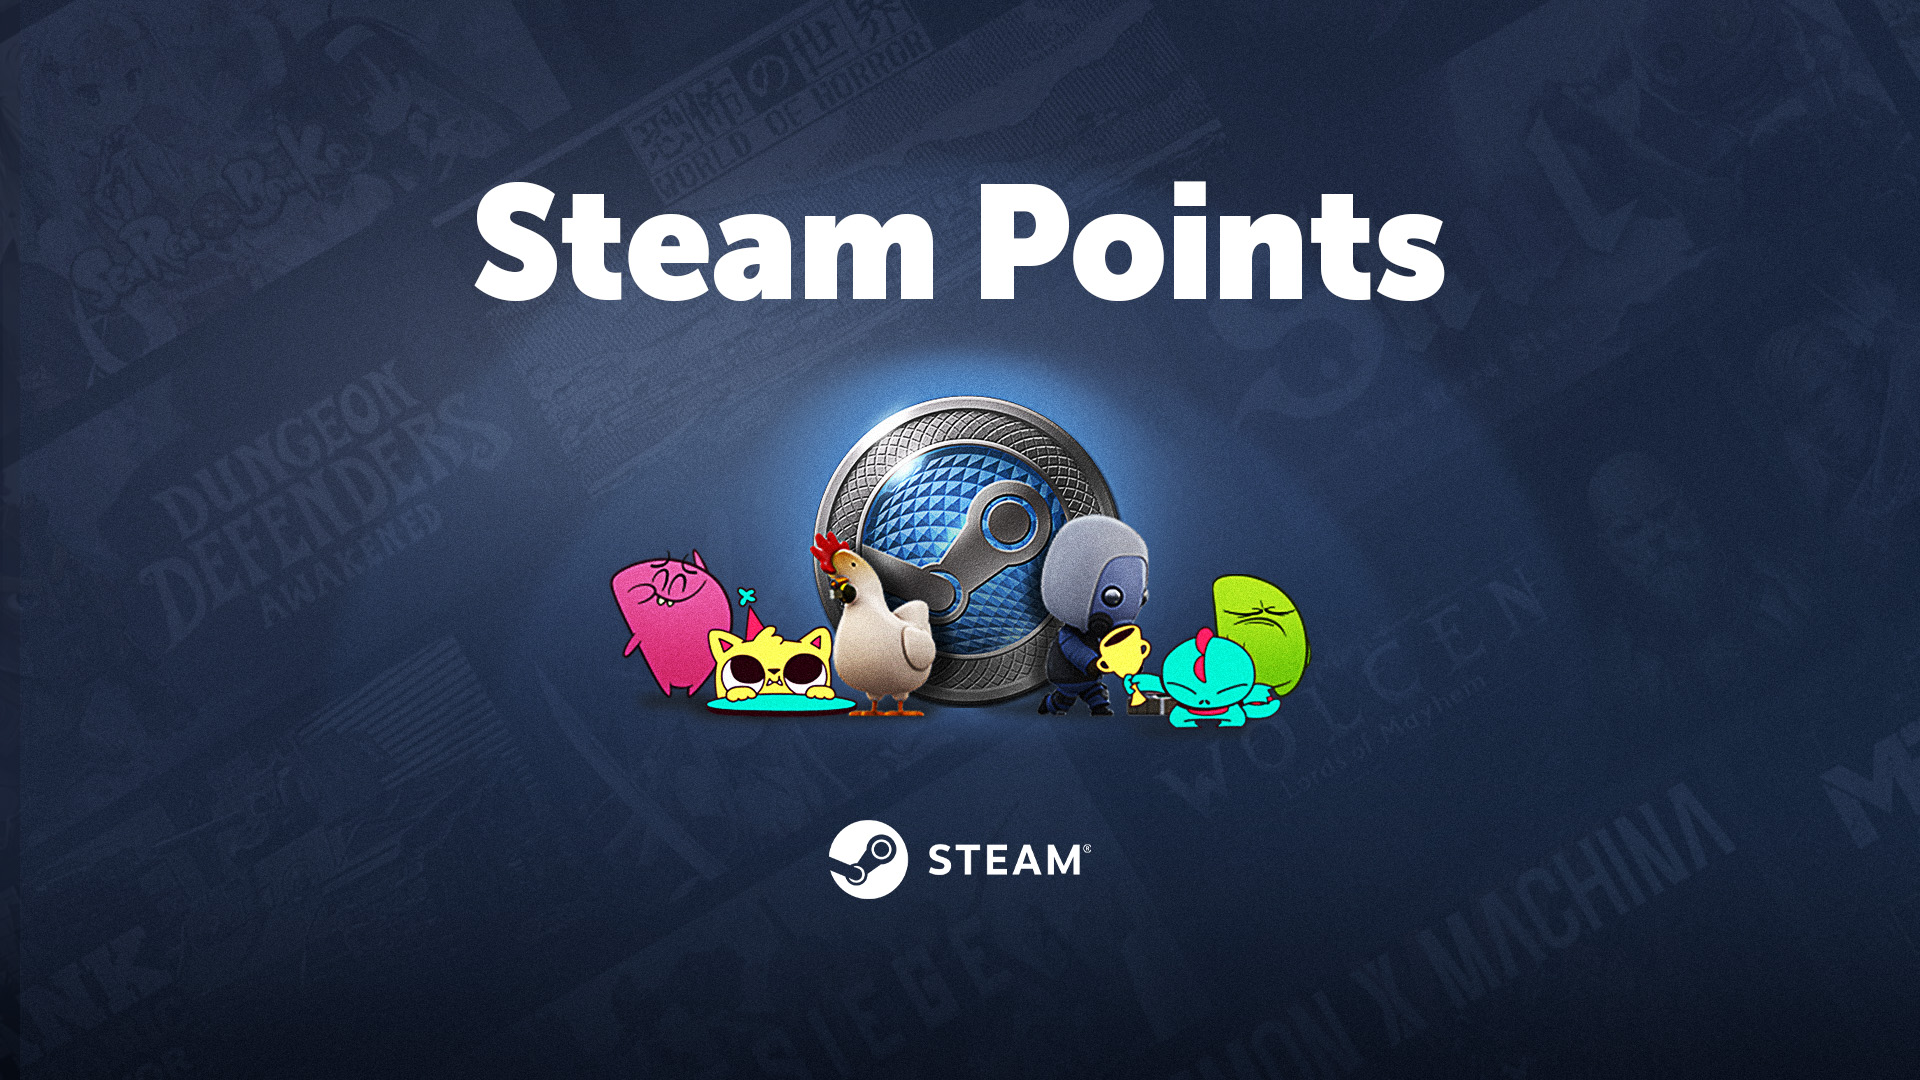 5.000 Steam Points Manual Delivery $2.54